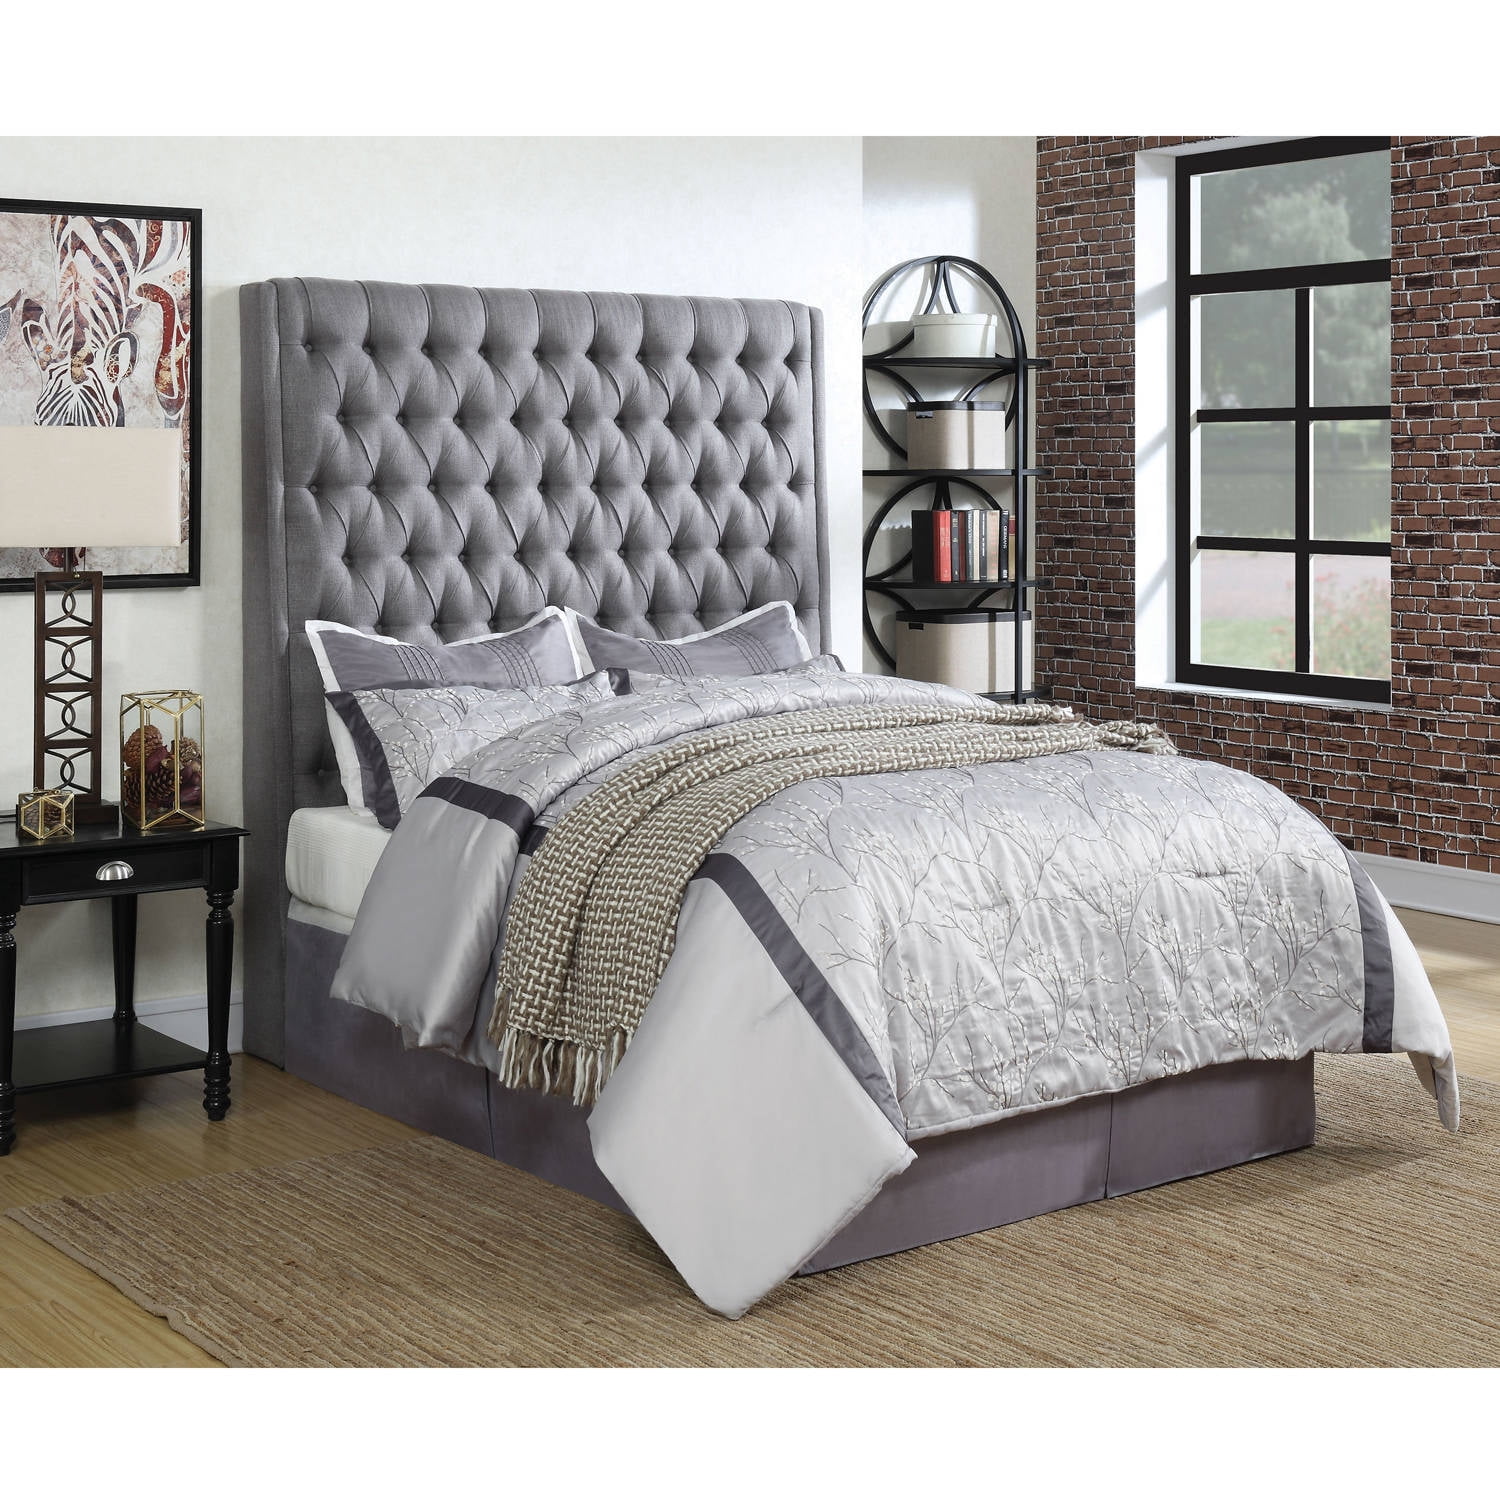 Details about   Flash Furniture Bedford King Fabric Panel Headboard in Dark Gray 